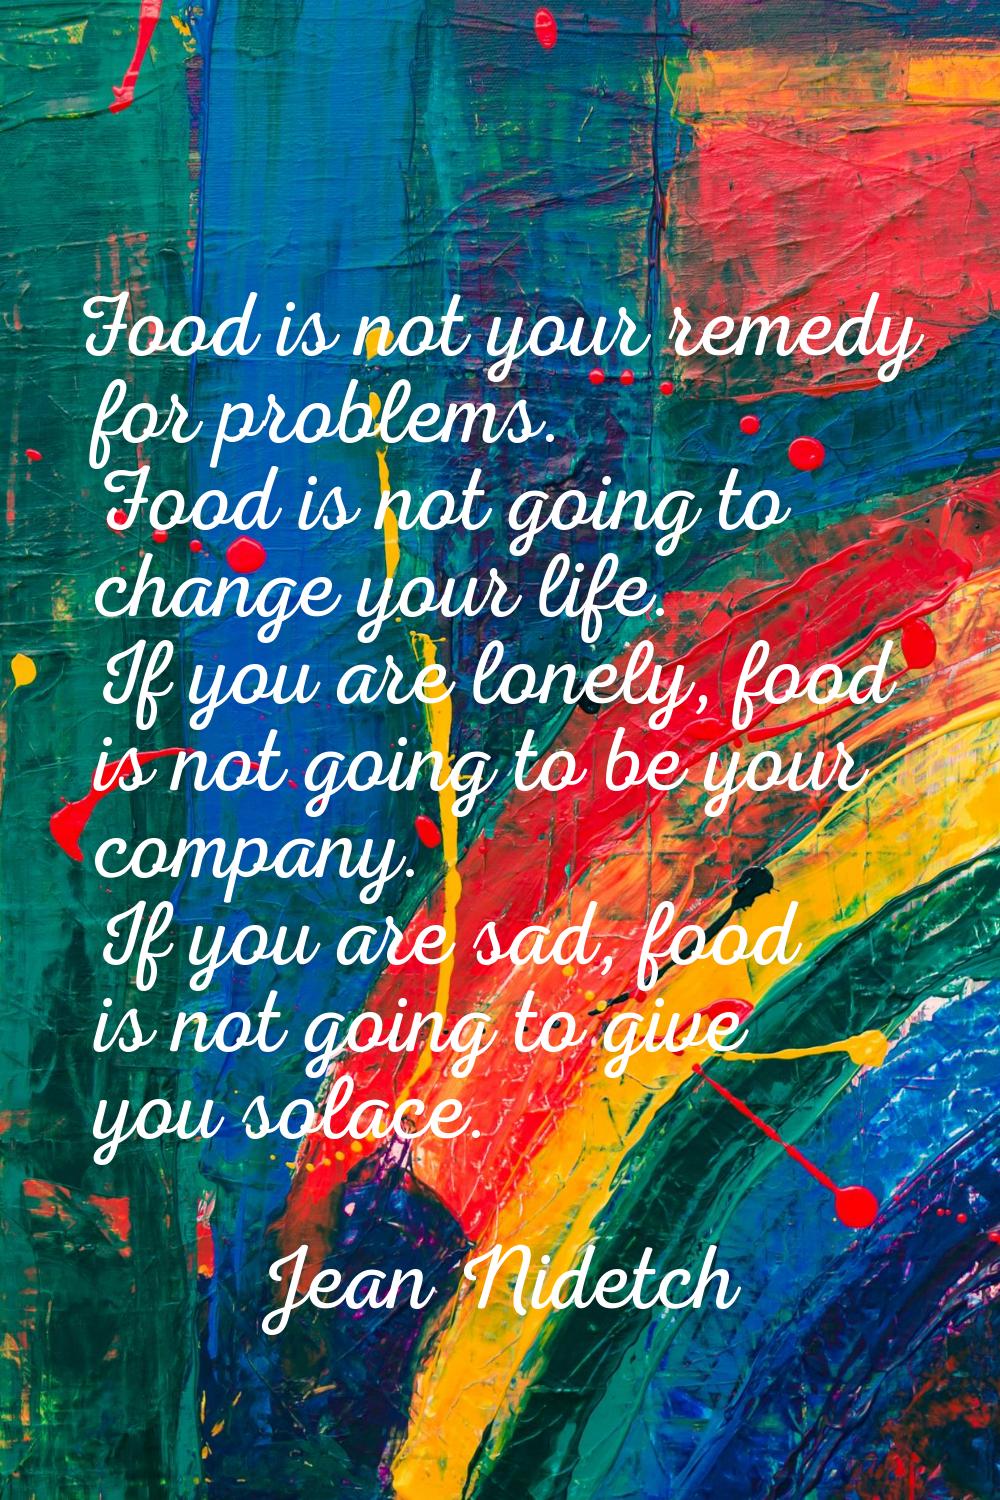 Food is not your remedy for problems. Food is not going to change your life. If you are lonely, foo